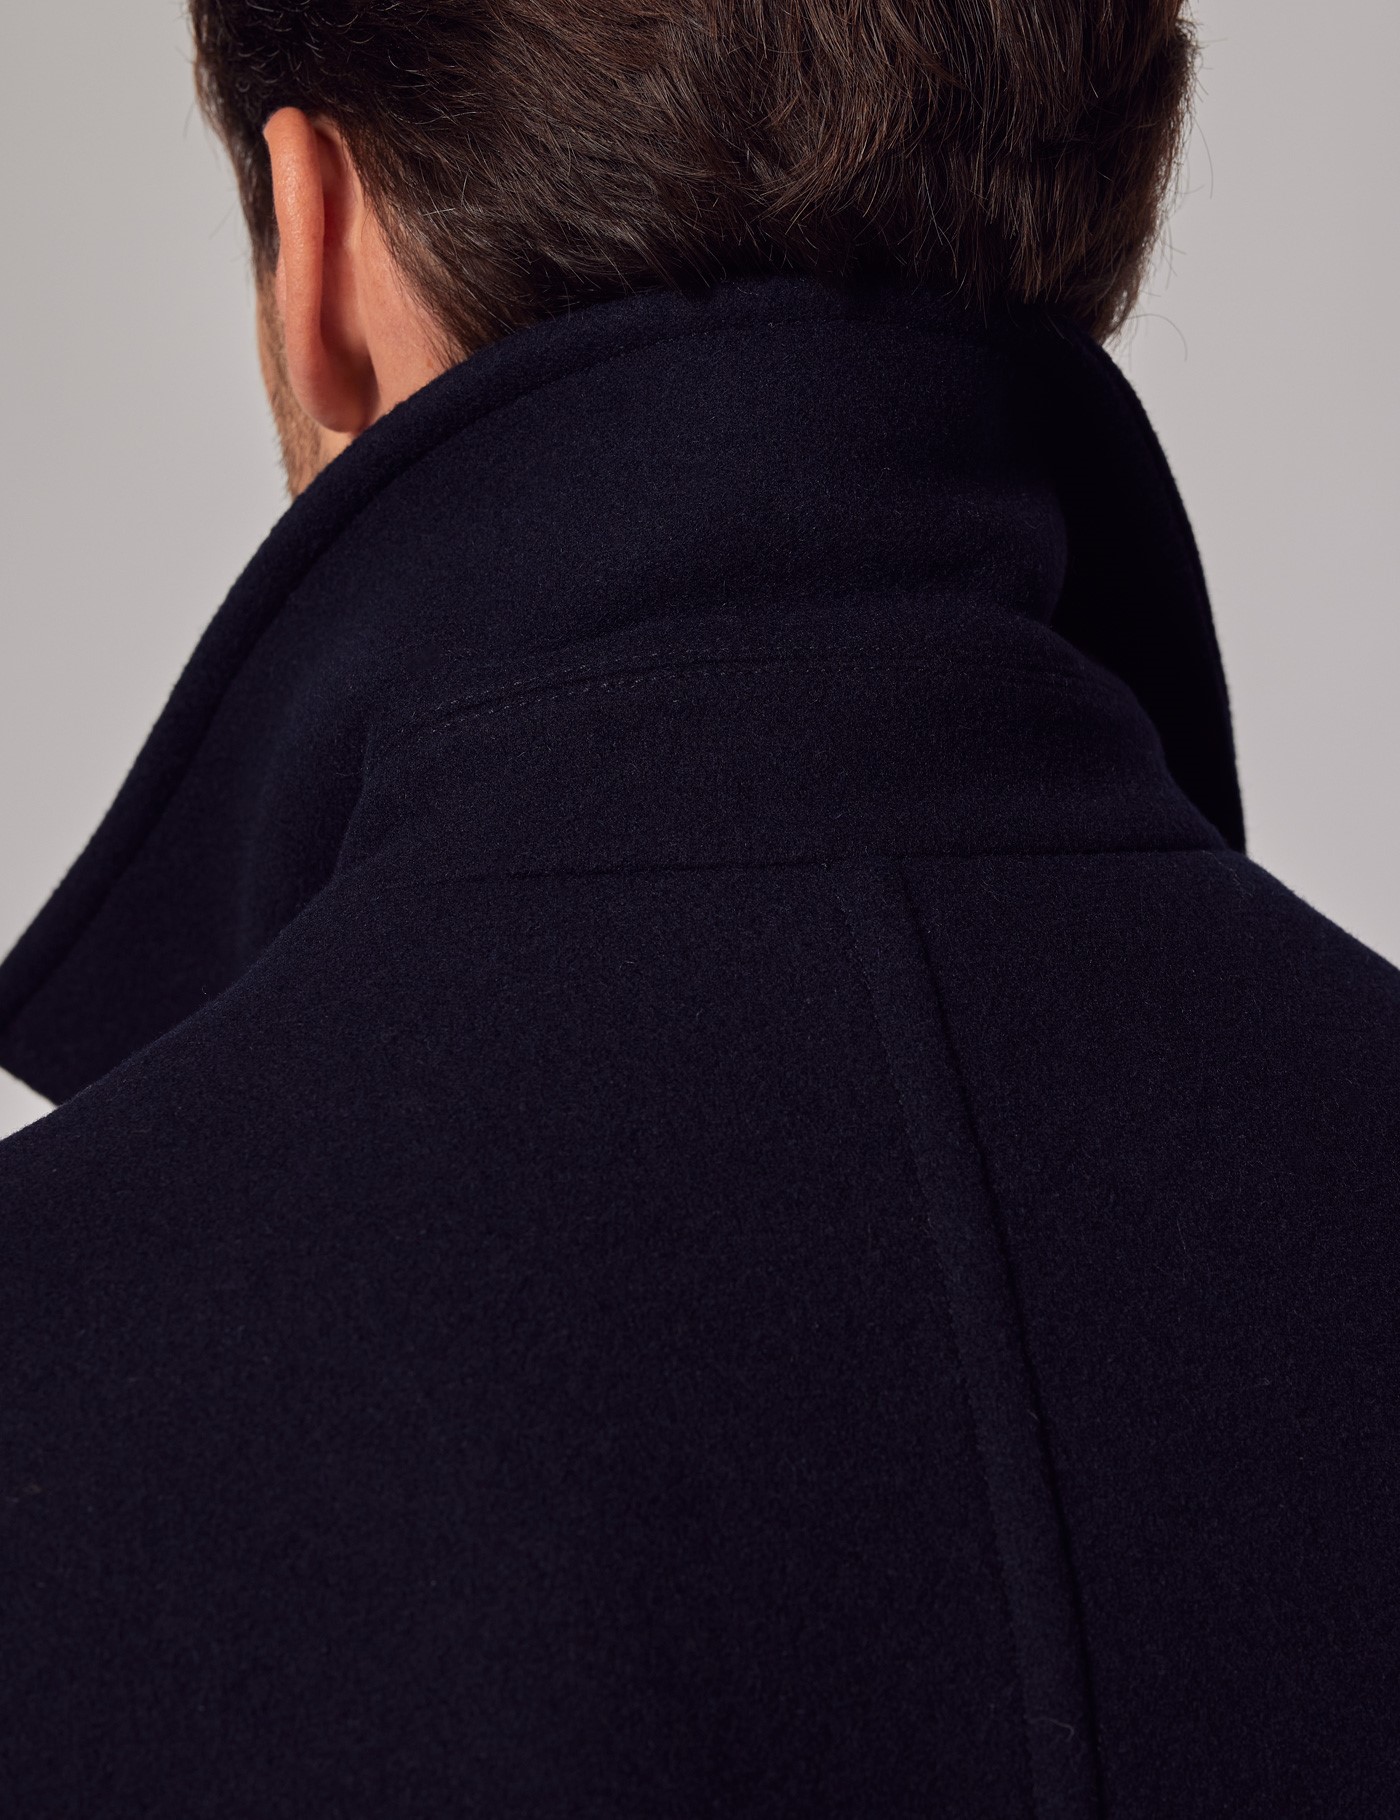 Men’s Navy Wool Peacoat | Hawes and Curtis